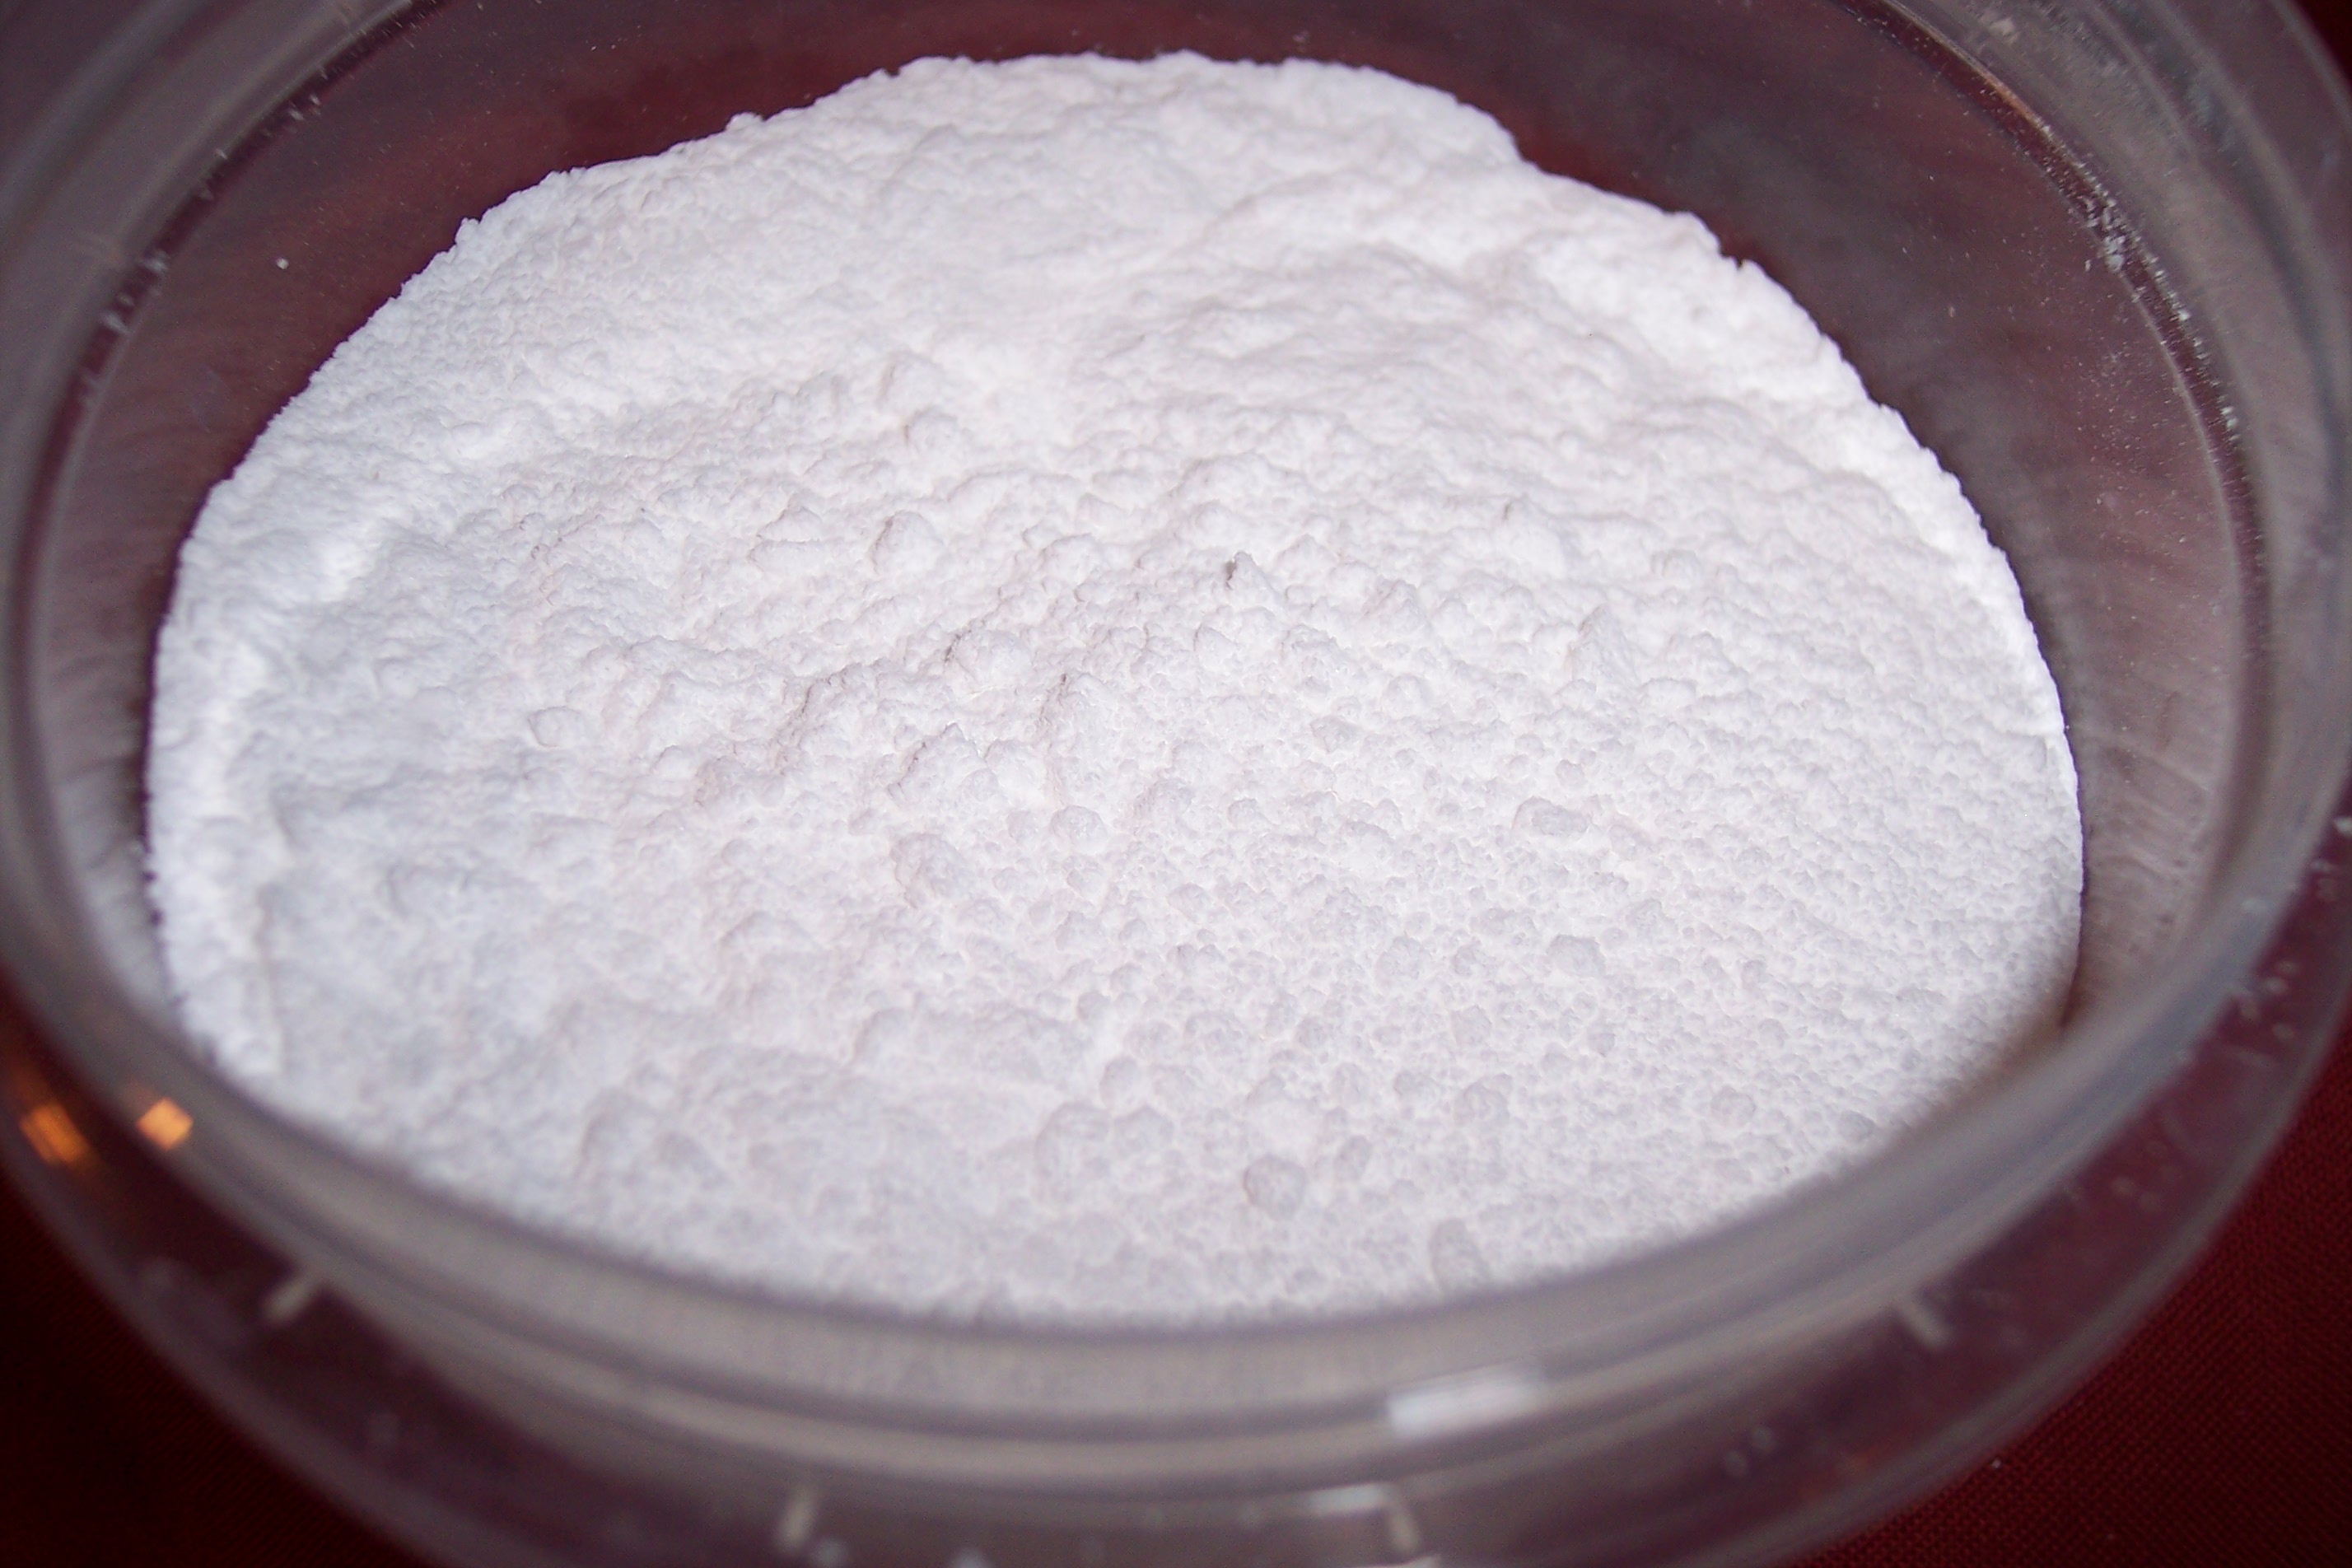 Can powdered sugar be substituted for regular sugar in recipes?